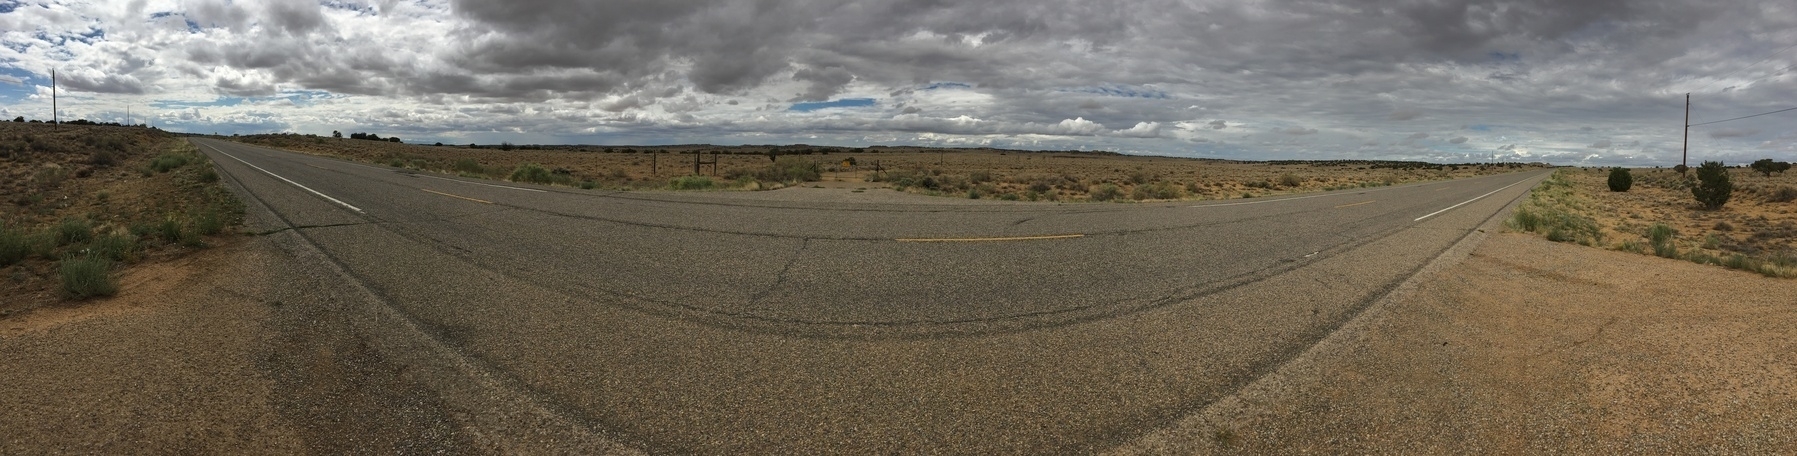 panorama of a road